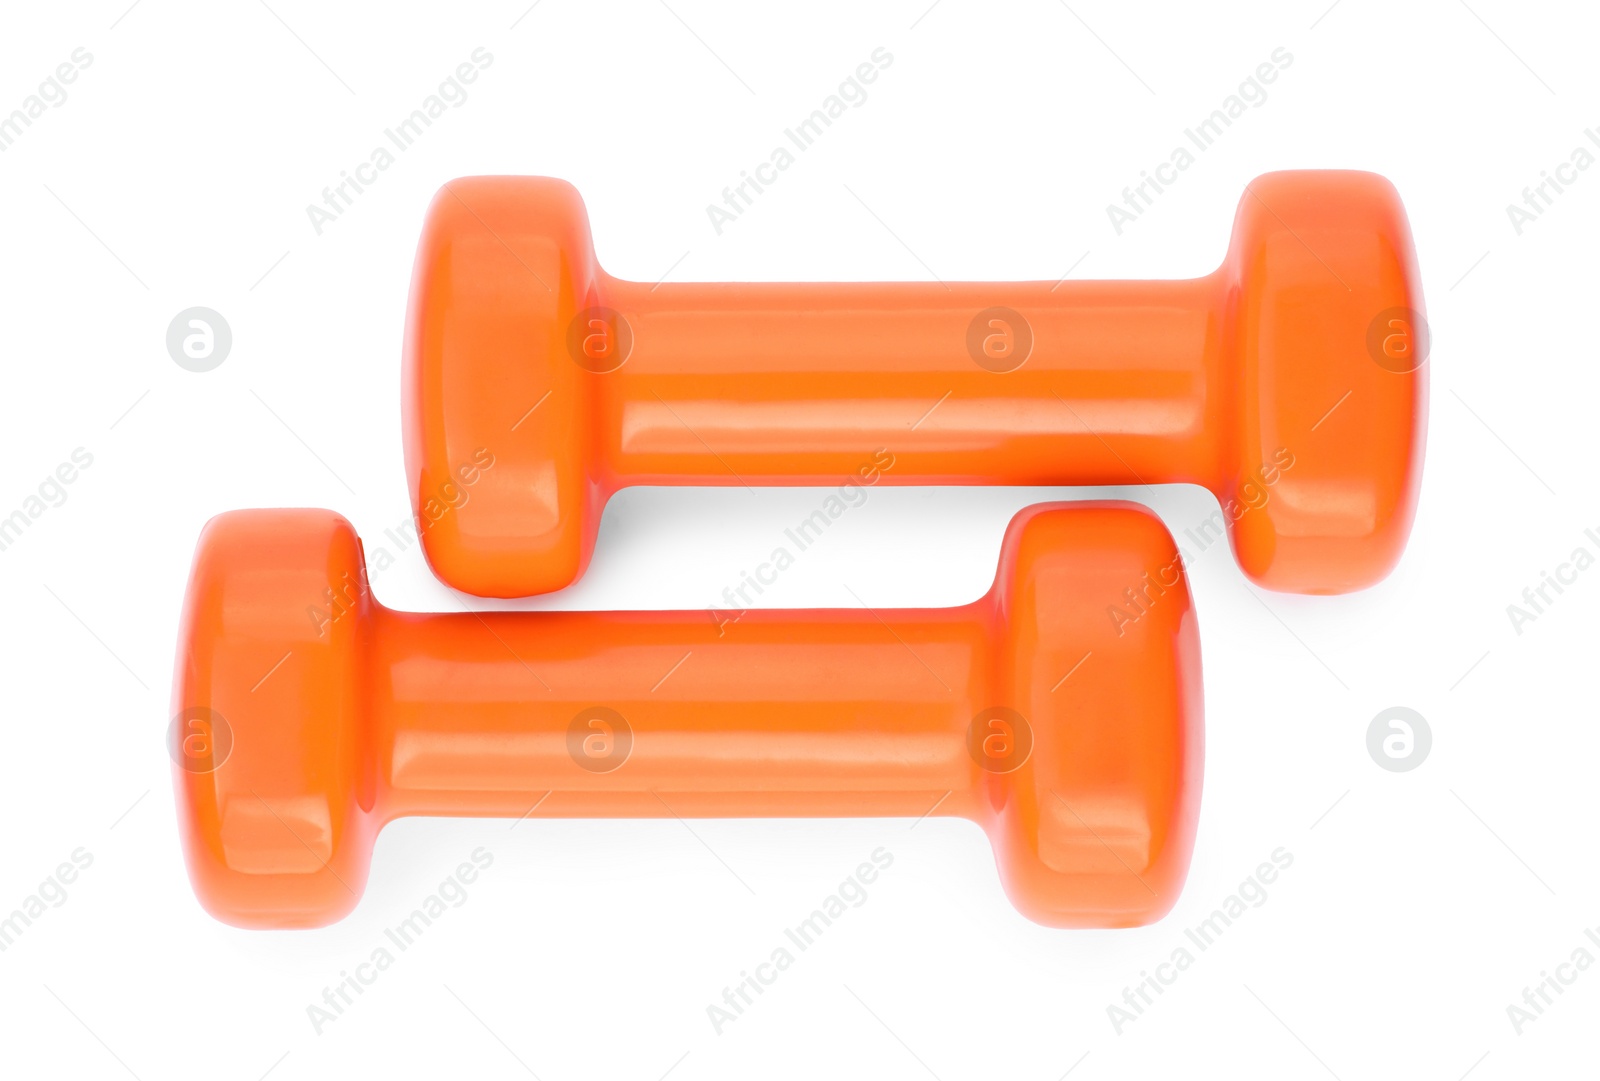 Photo of Orange dumbbells isolated on white, top view. Sports equipment